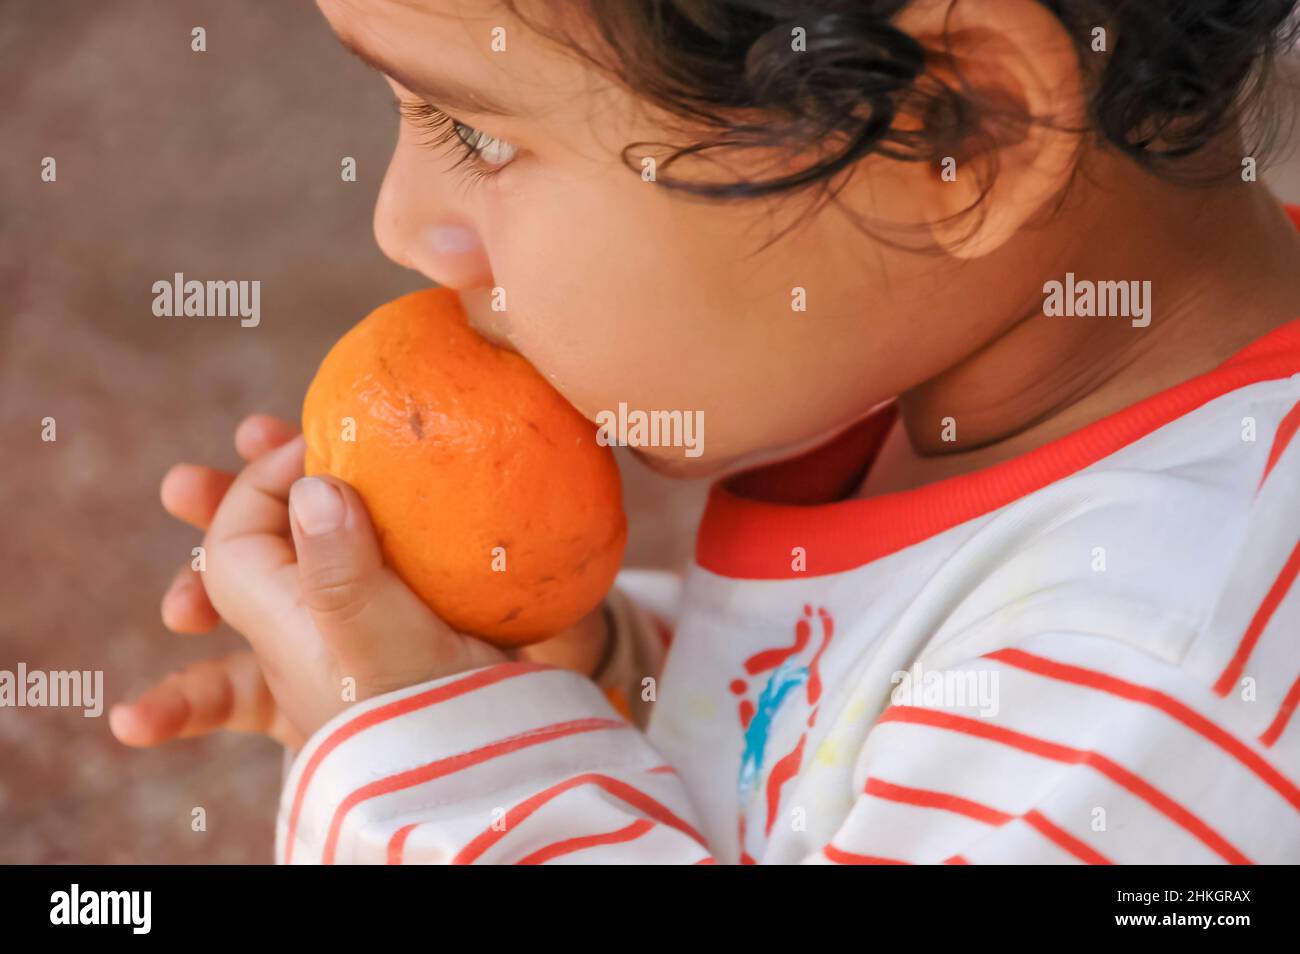 A portrait of an East Indian baby boy / child / kid showing signs of teething by chewing on an orange. Stock Photo